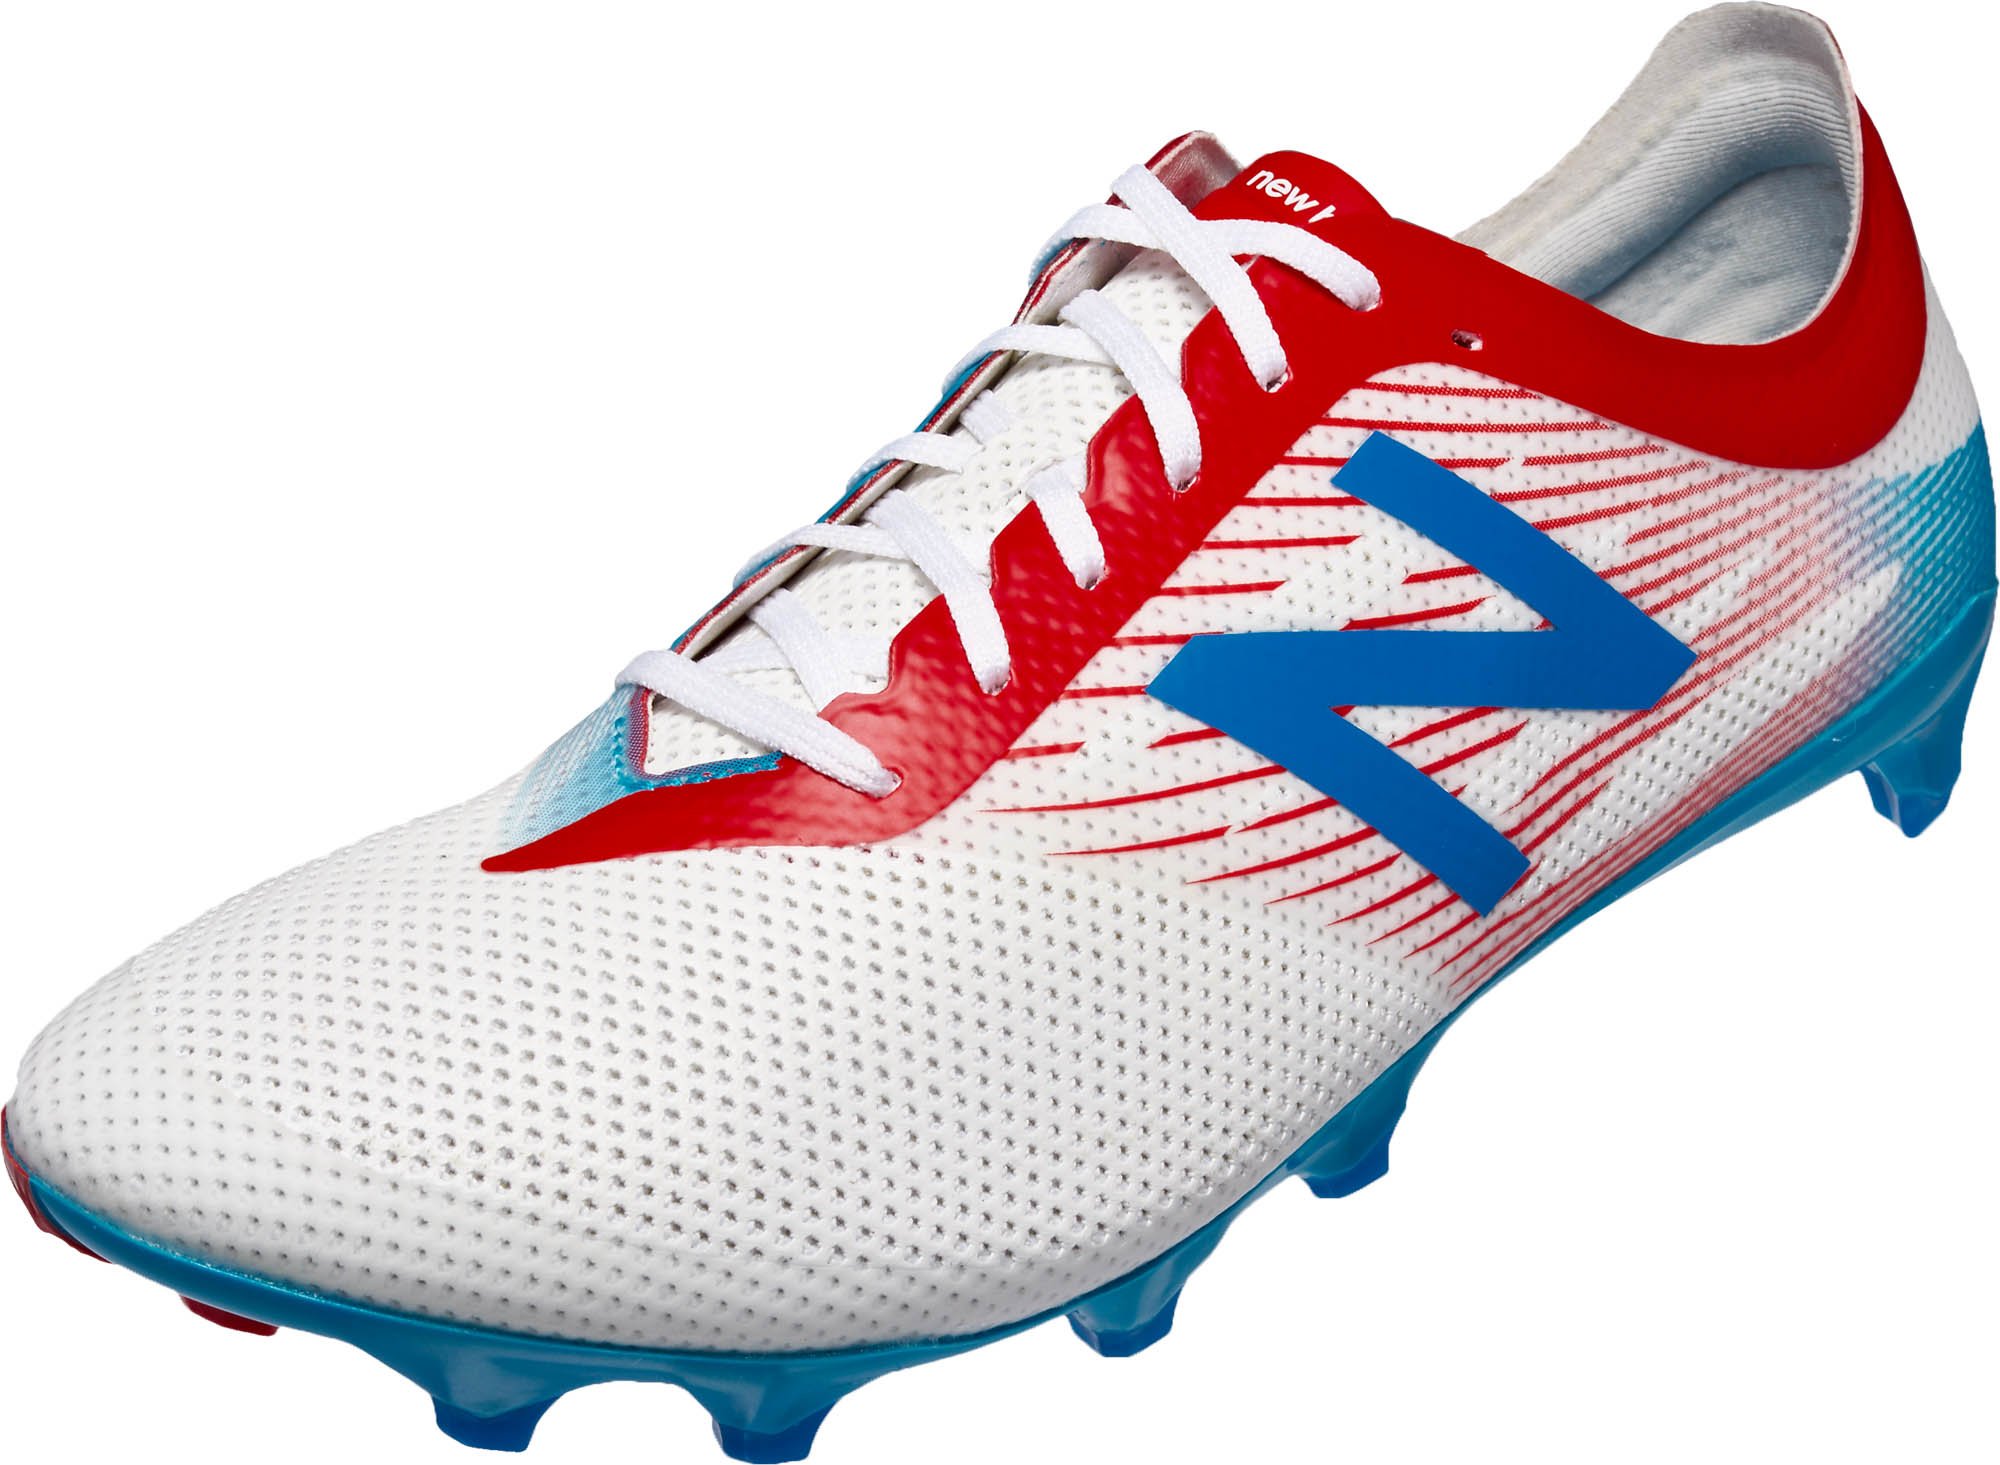 new balance soccer cleats white